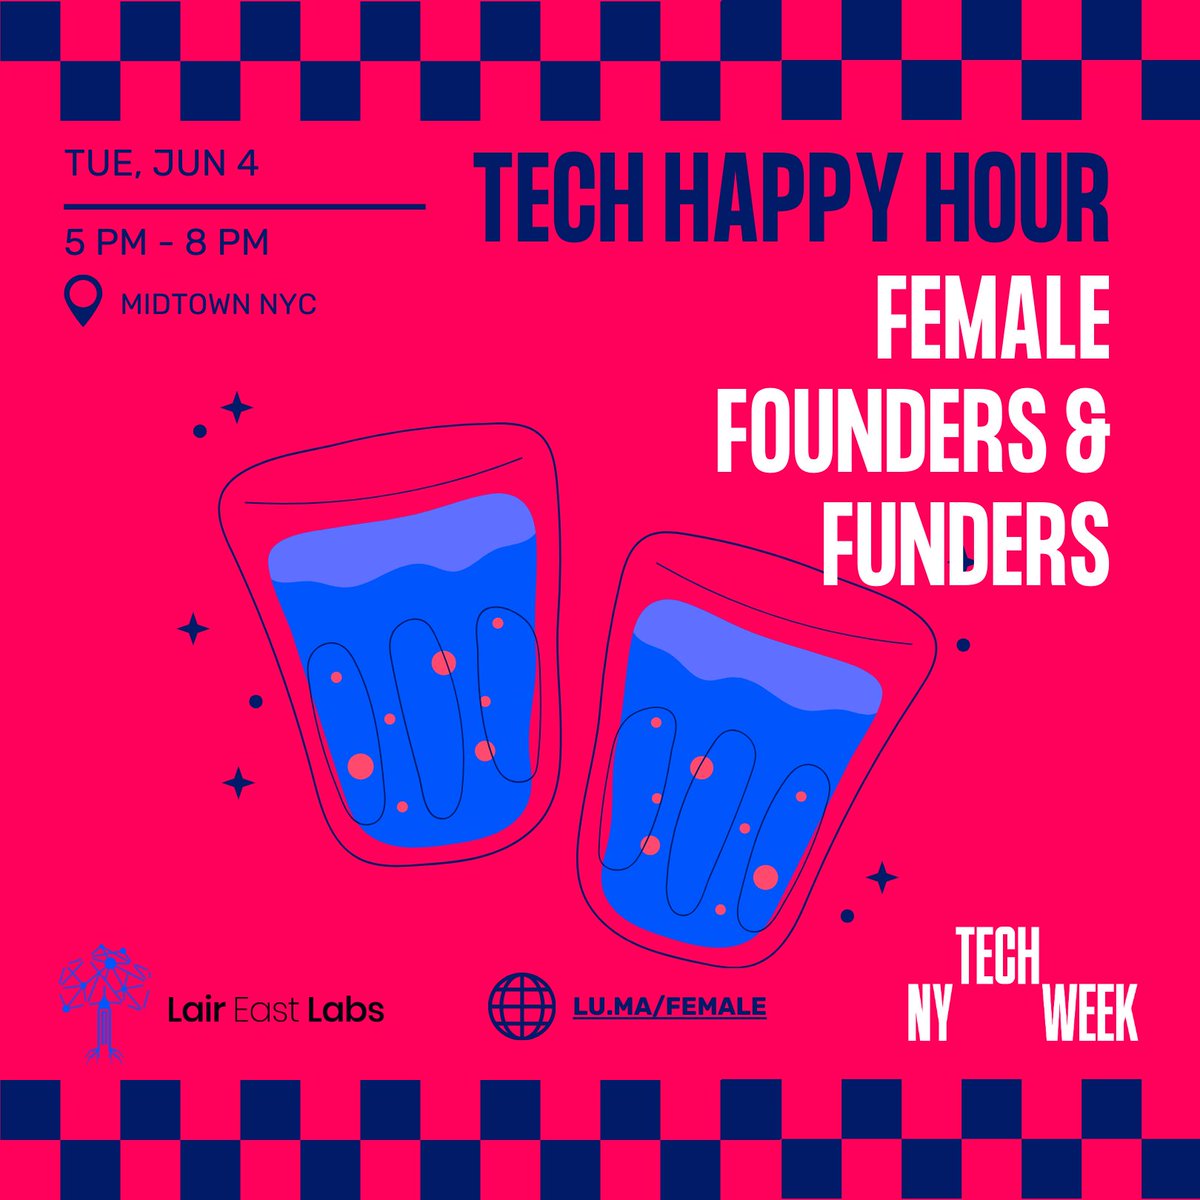 At this year's #NYtechweek, Lair East Labs is hosting 3 events to convene & celebrate the brilliant tech community in & around NYC 🎉 Up first: 🍹 Female Founders & Funders Happy Hour 📆 Tuesday, June 4 ⏰ 5PM - 8PM ✅ RSVP lu.ma/female @Techweek_